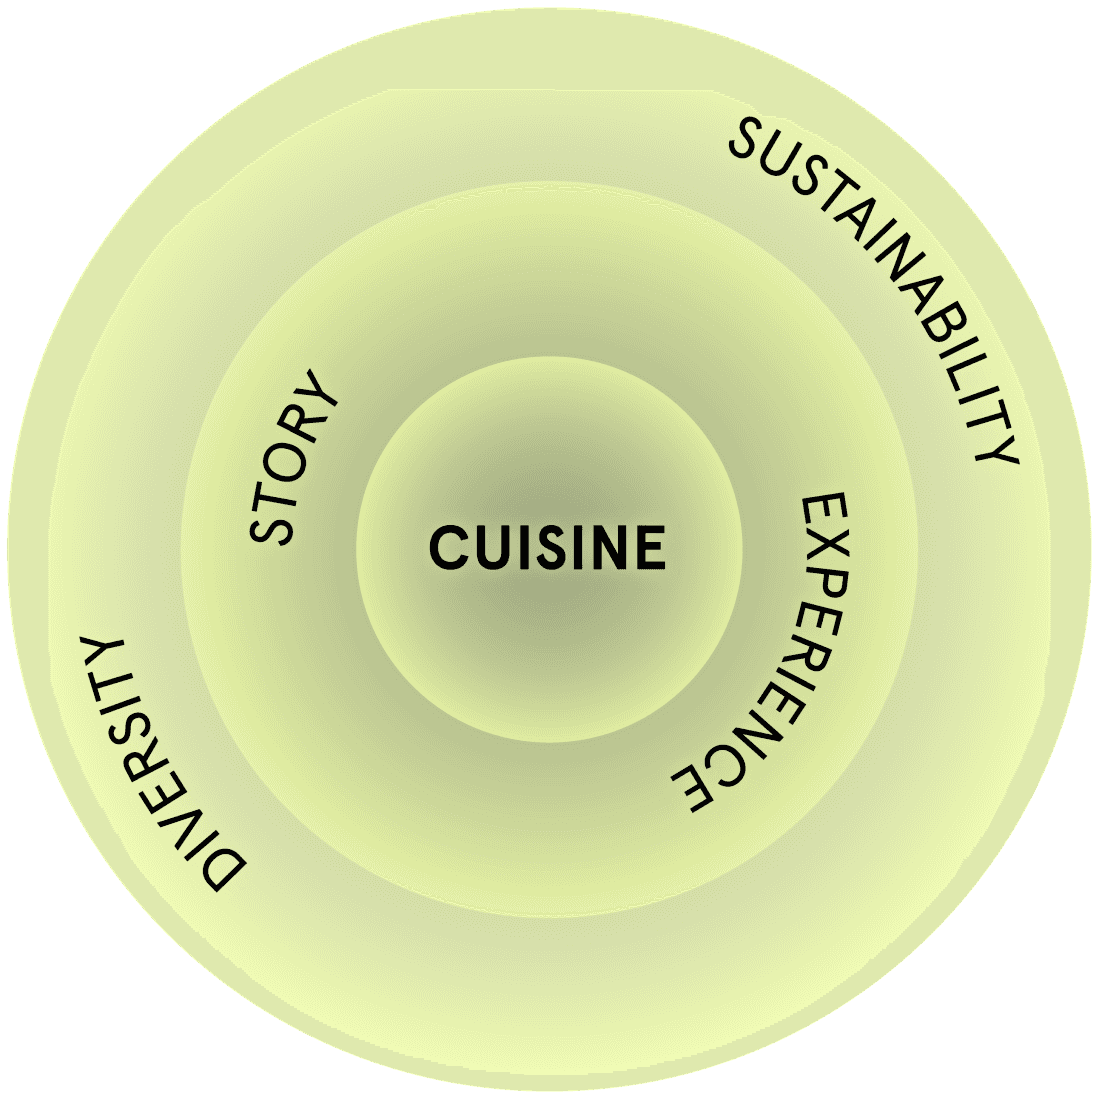 Table Sage five-values graphic of concentric circles showing the three levels of Conscious Dining values- from Cuisine in the center to Experience and Story in the second circle to Sustainability and Diversity in the outer most circle